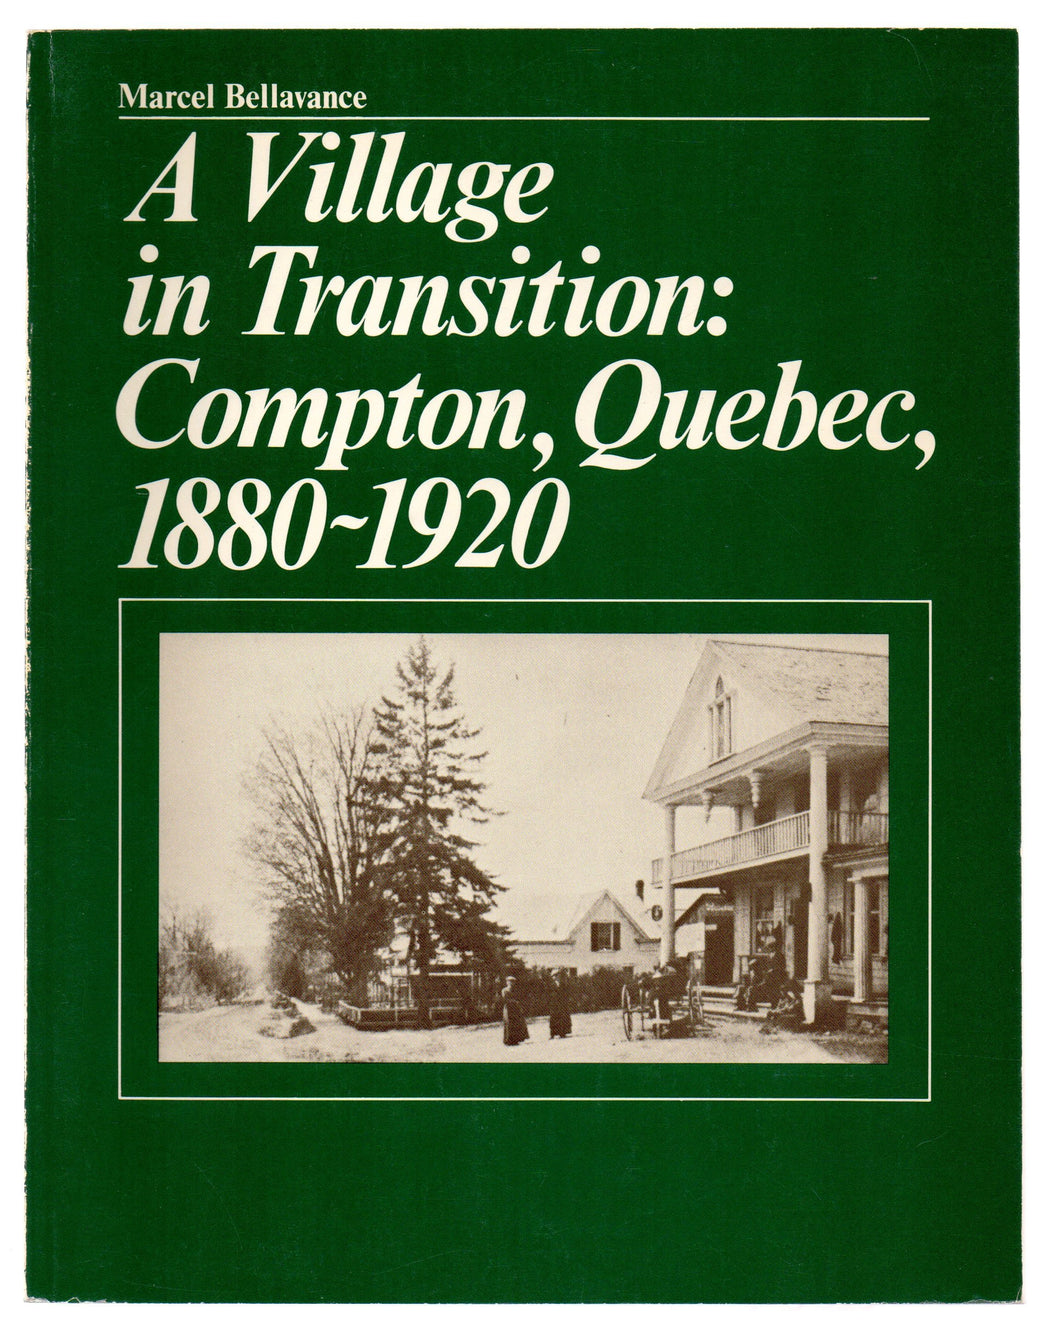 A Village in Transition: Compton, Quebec, 1880-1920